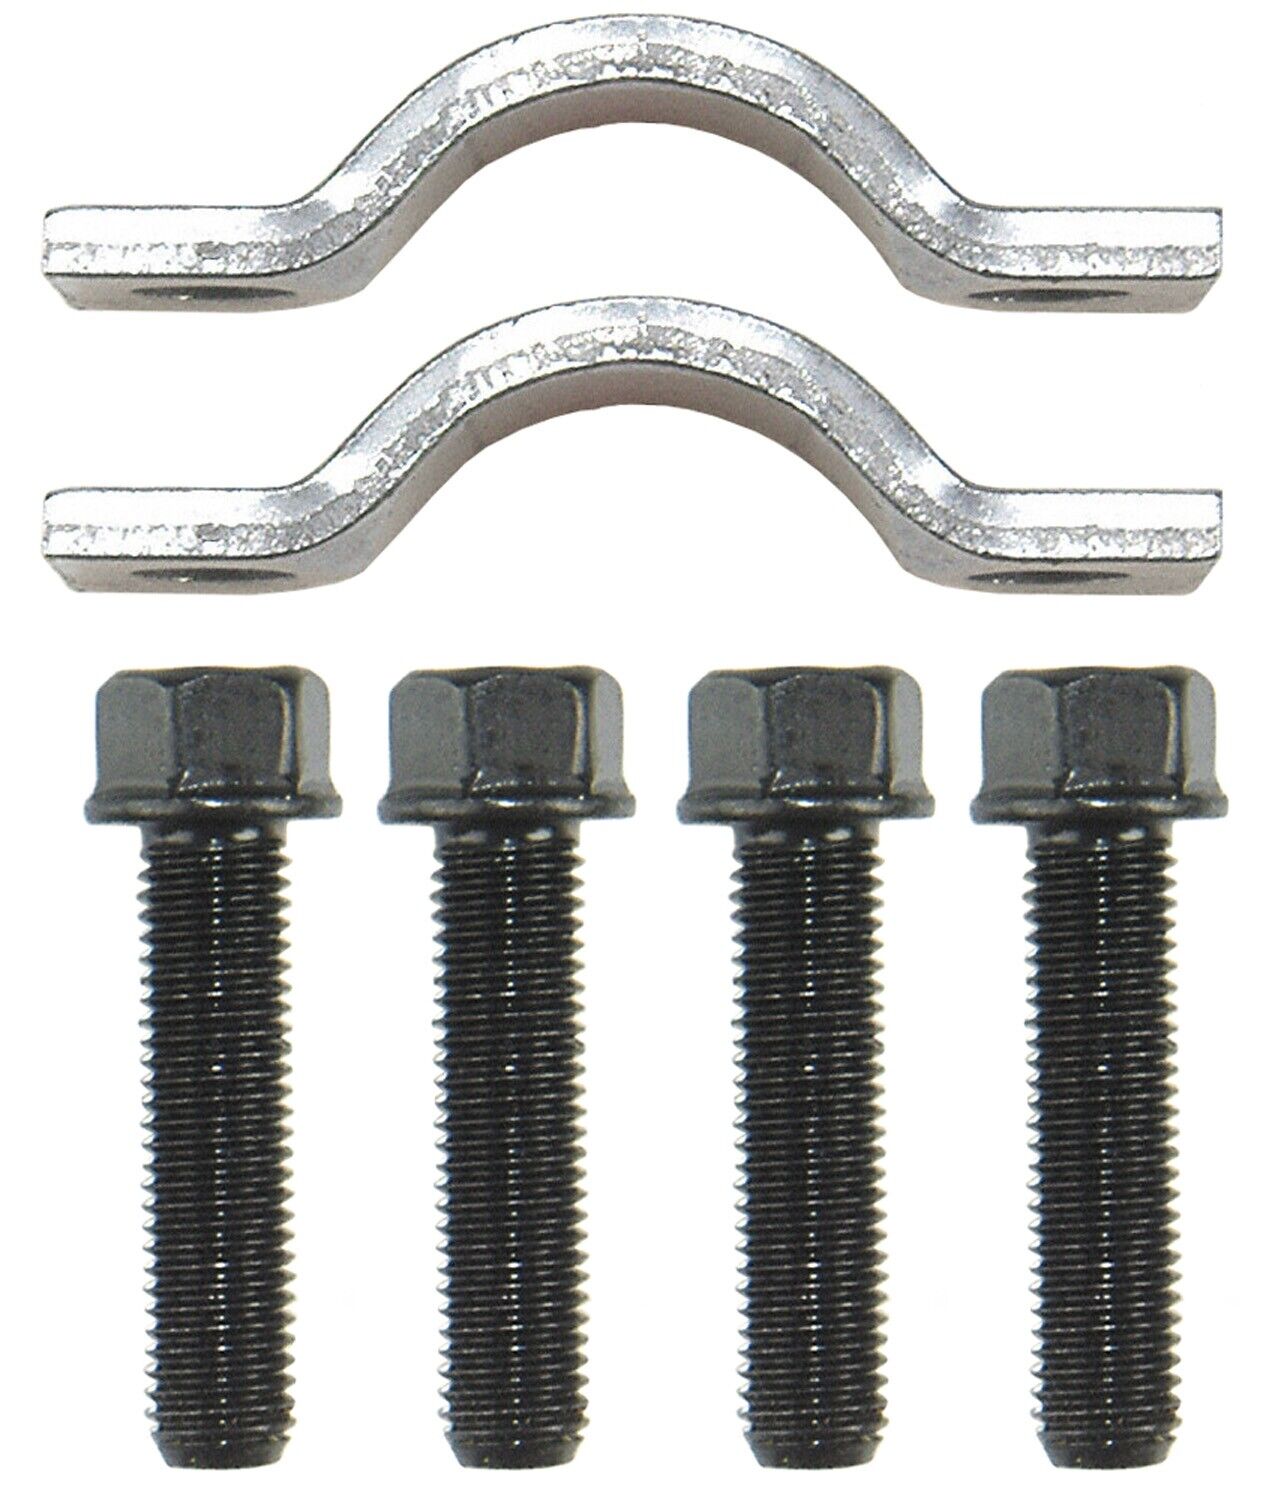 ACDelco 45U0508 Professional U-Joint Clamp Kit with Hardware 